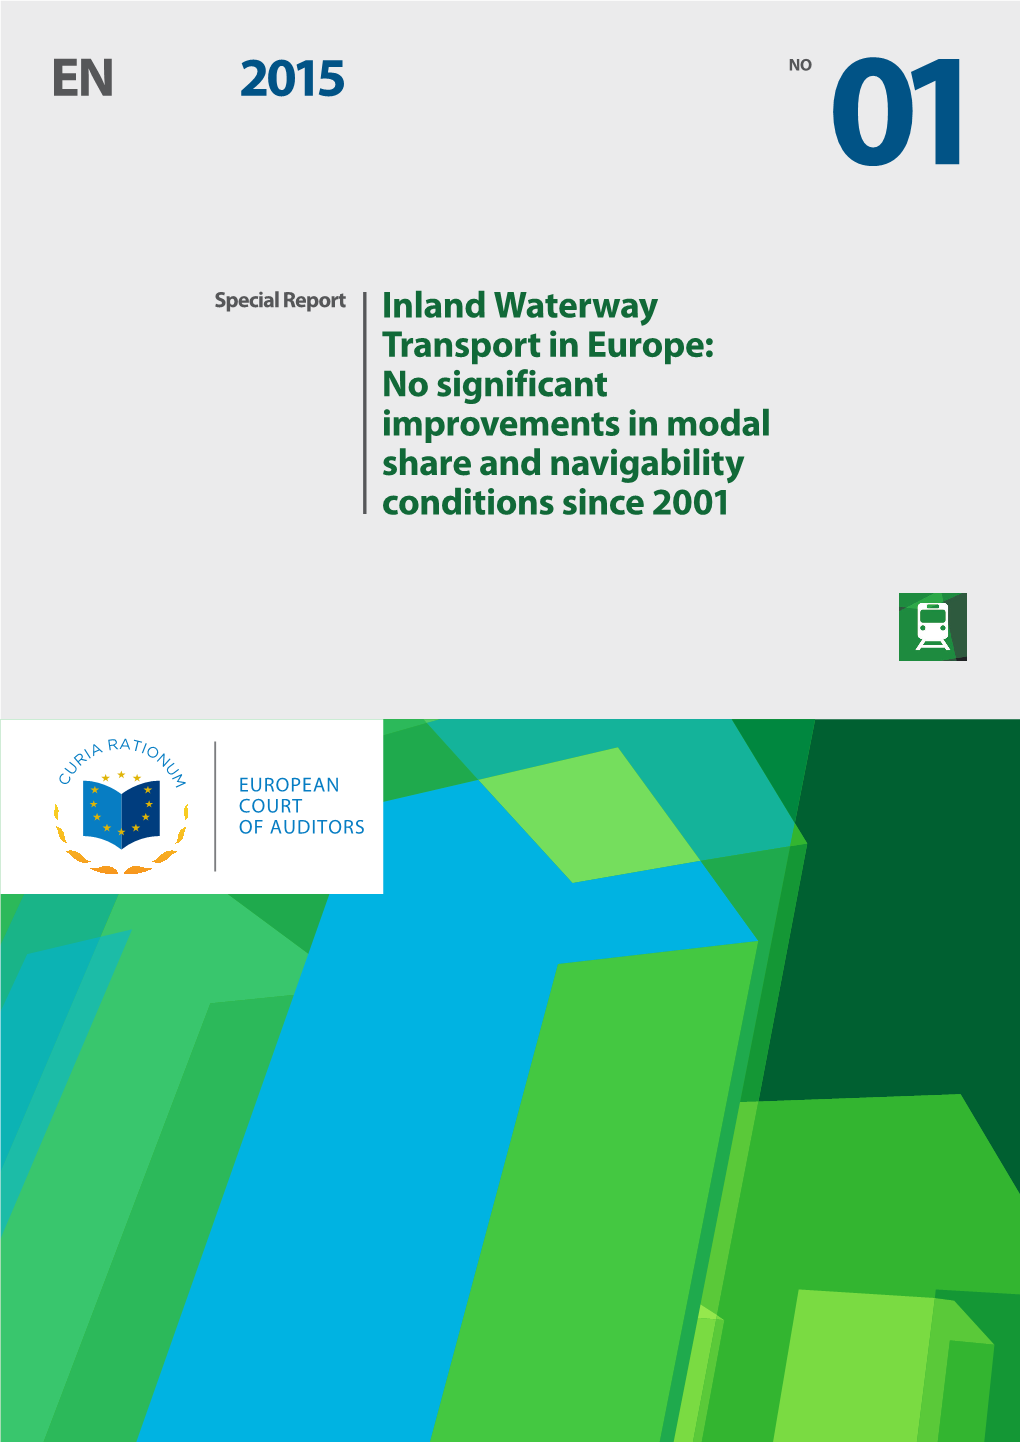 Inland Waterway Transport in Europe: No Significant Improvements in Modal Share and Navigability Conditions Since 2001